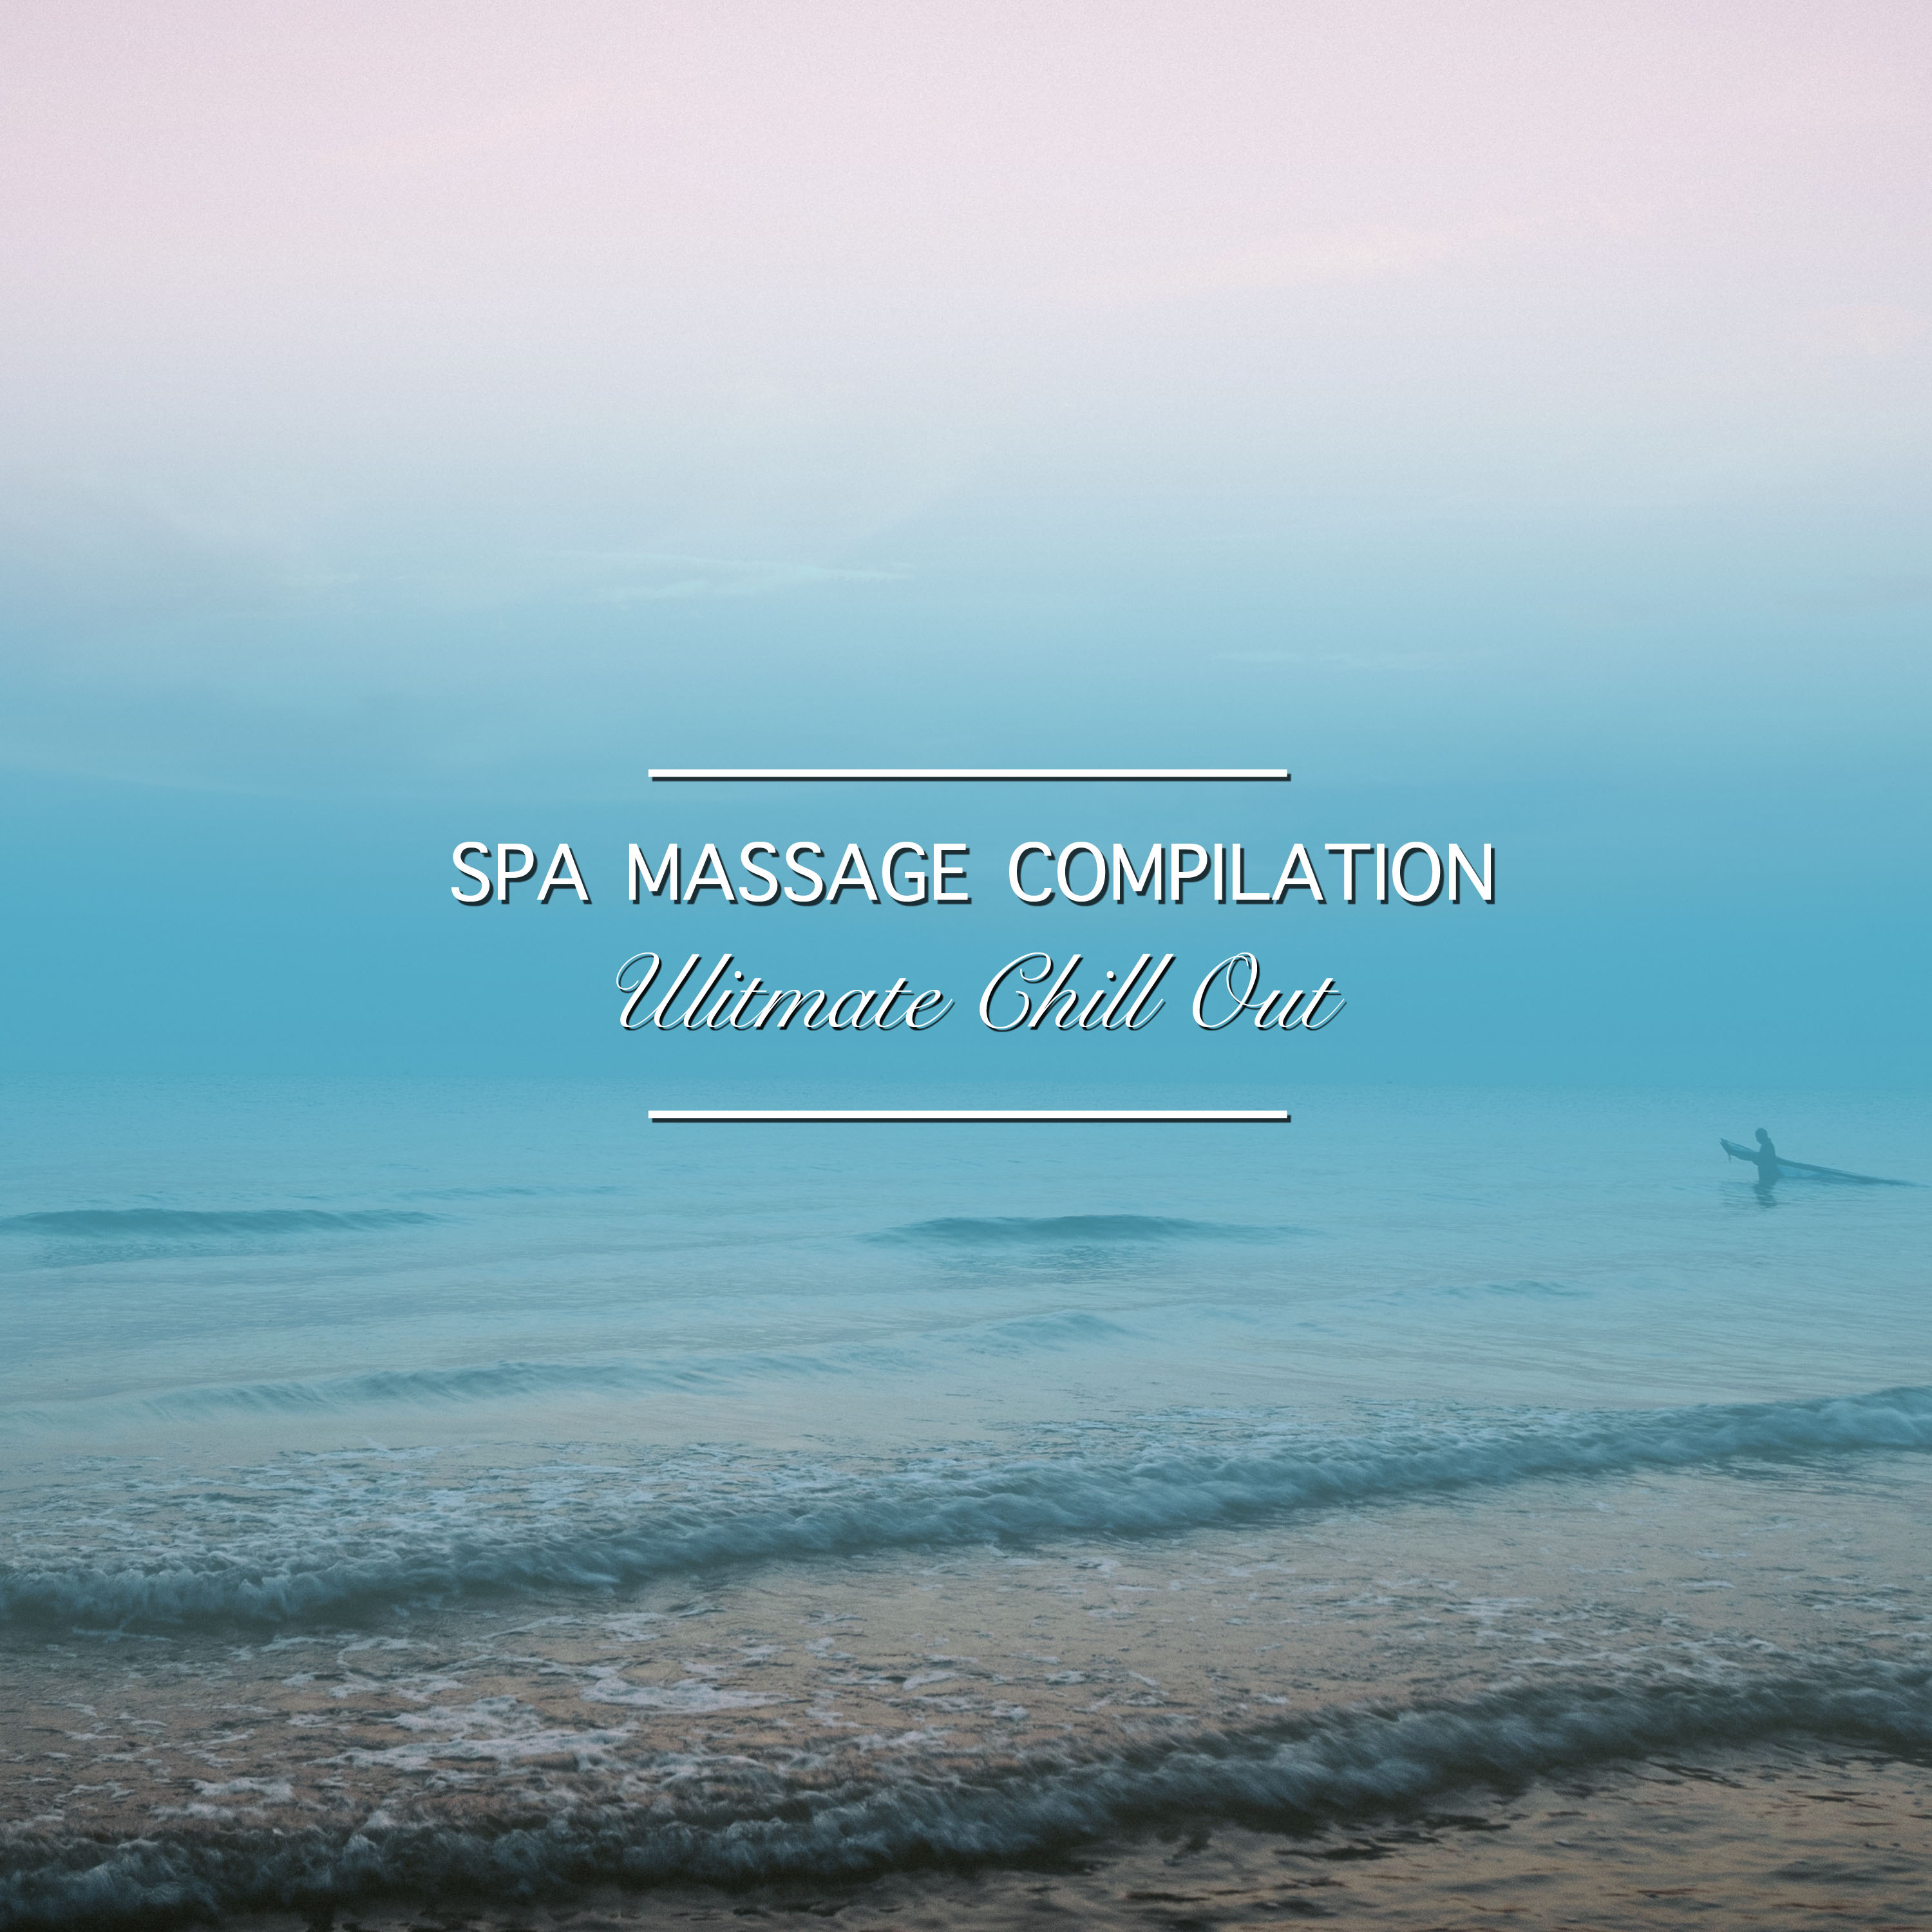 2018 A Spa Massage Compilation - Ultimate Chill Out